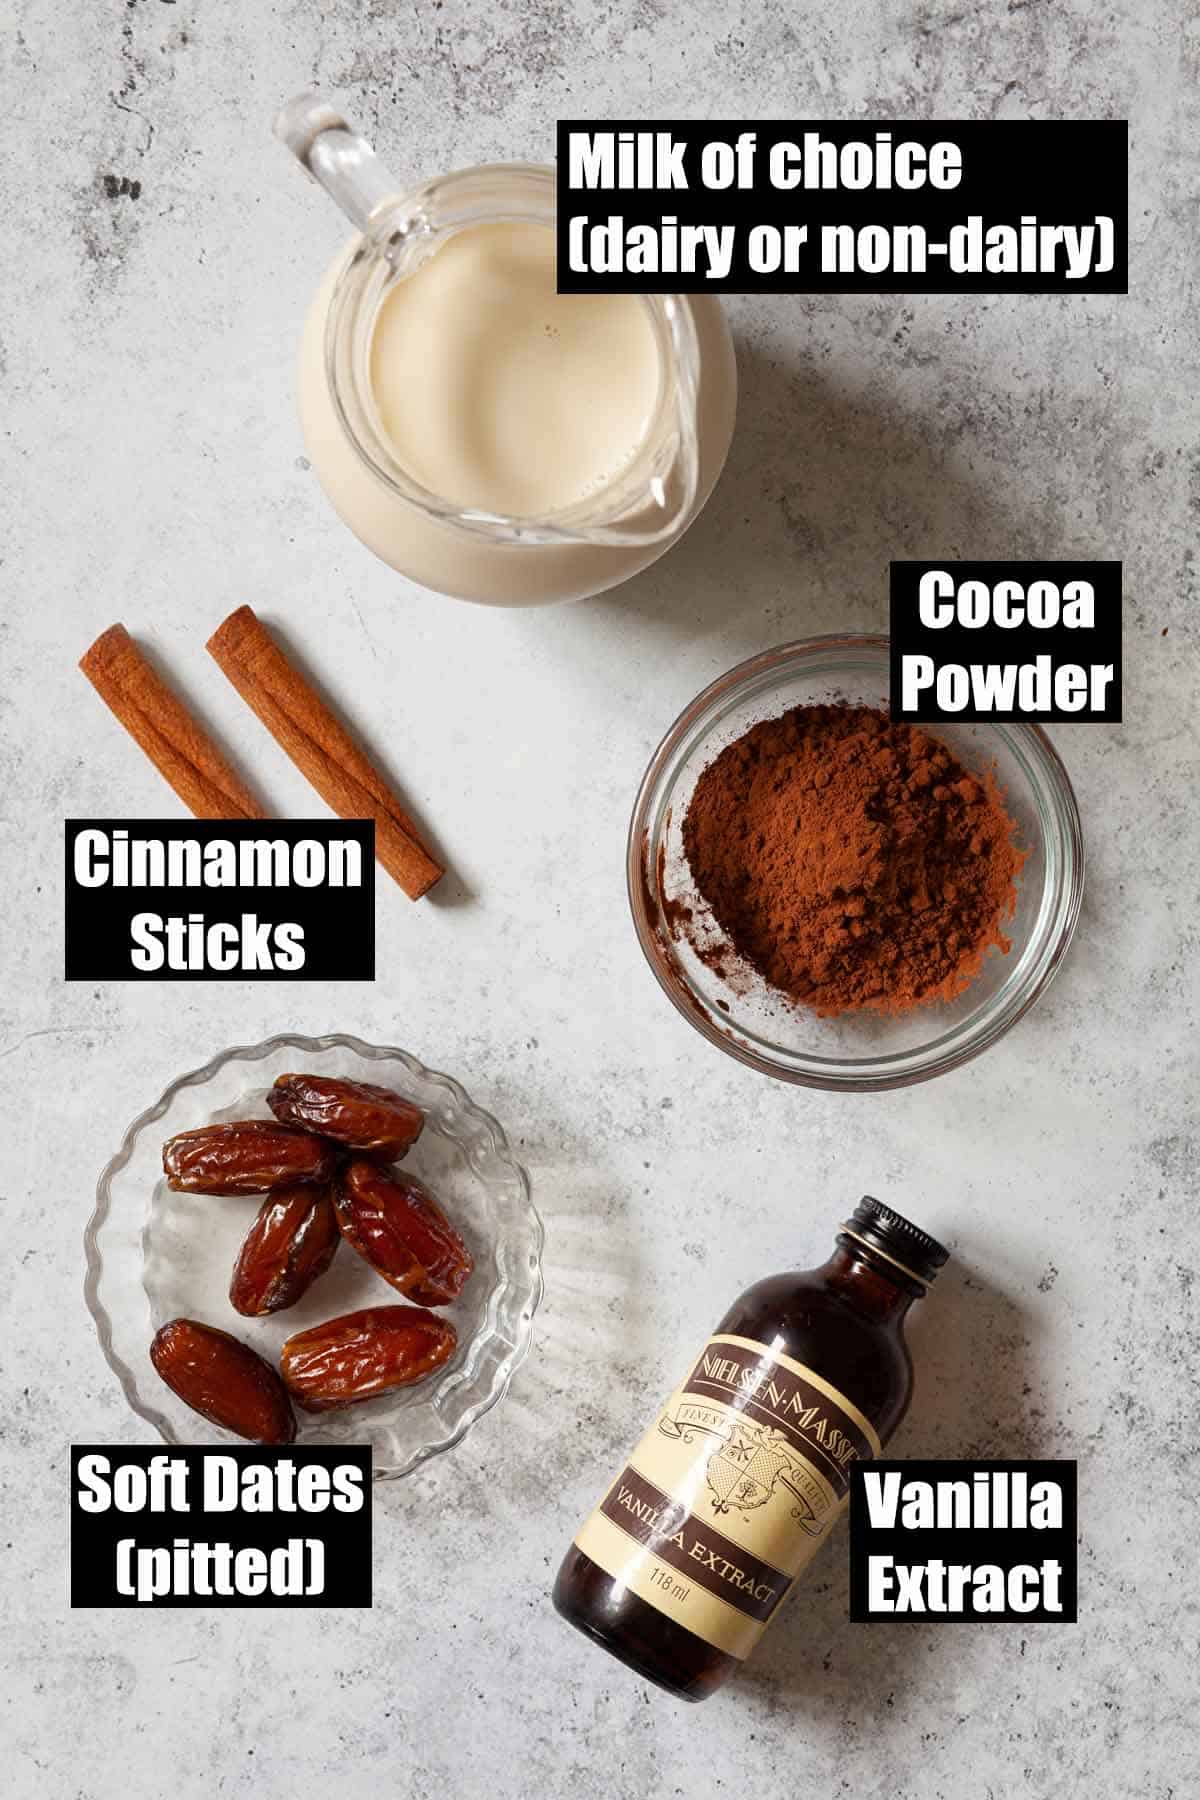 Labelled ingredients for a healthy cocoa drink sweetened with dates.